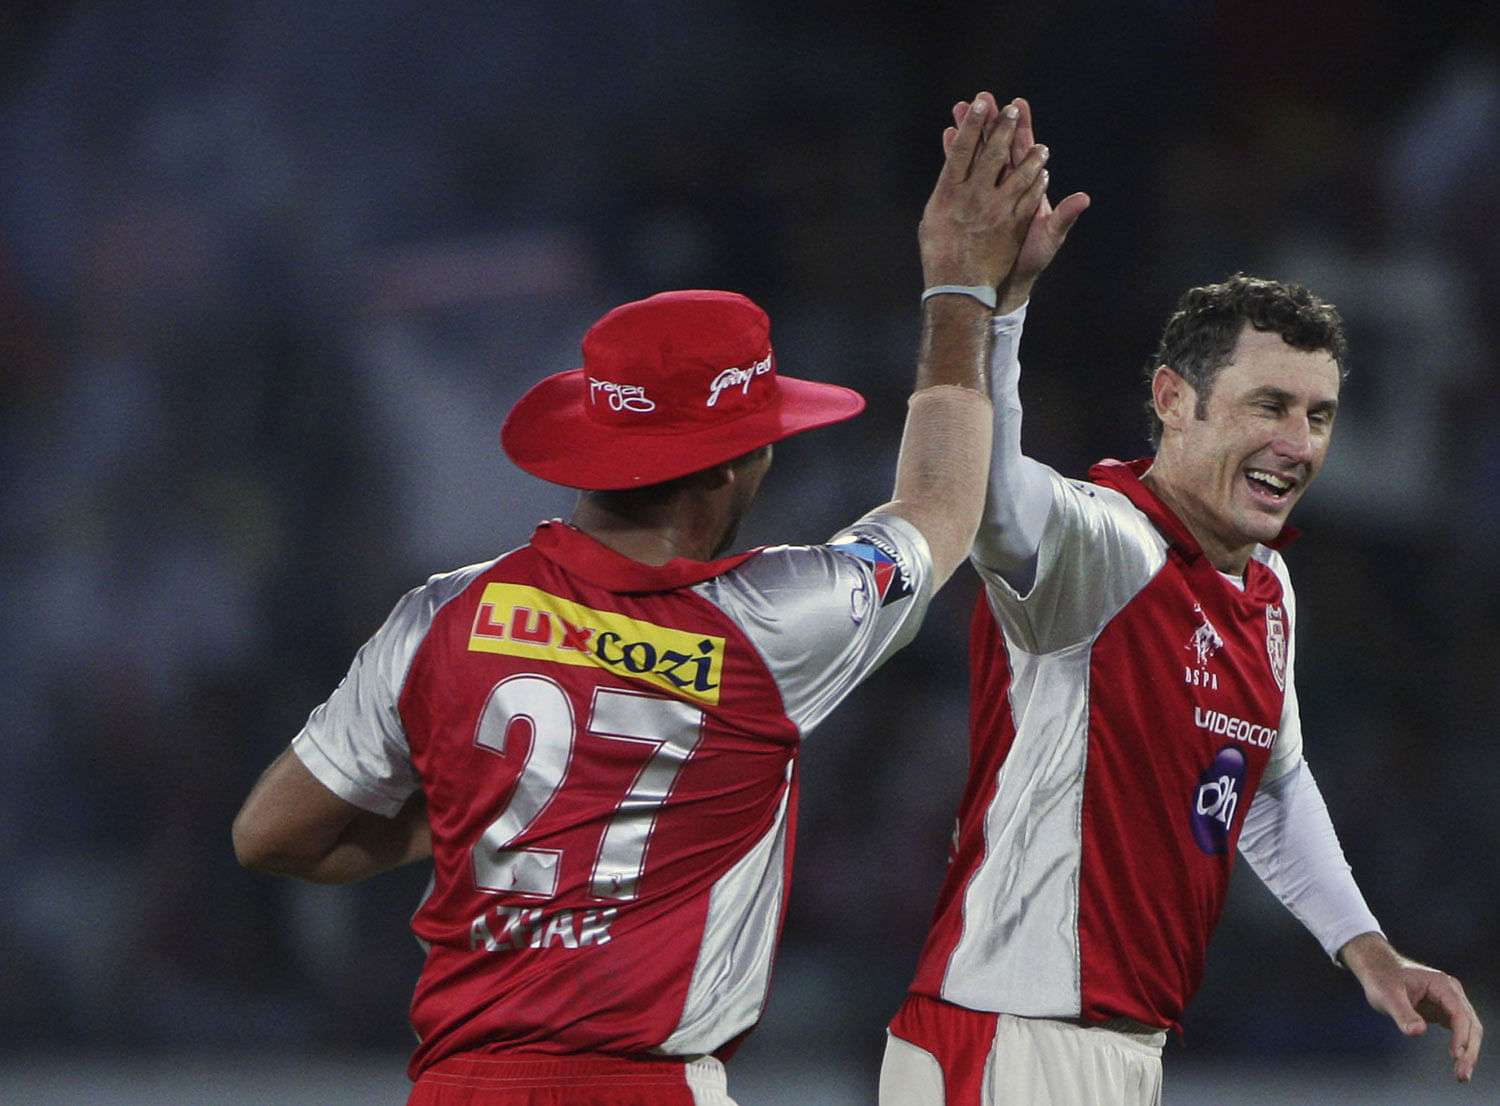 Kings XI Punjab bowler David Hussey, right, with Azhar Mahmood, celebrates the wicket of Deccan Chargers Cameron White during their Indian Premier League (IPL) cricket match in Hyderabad on Tuesday. AP